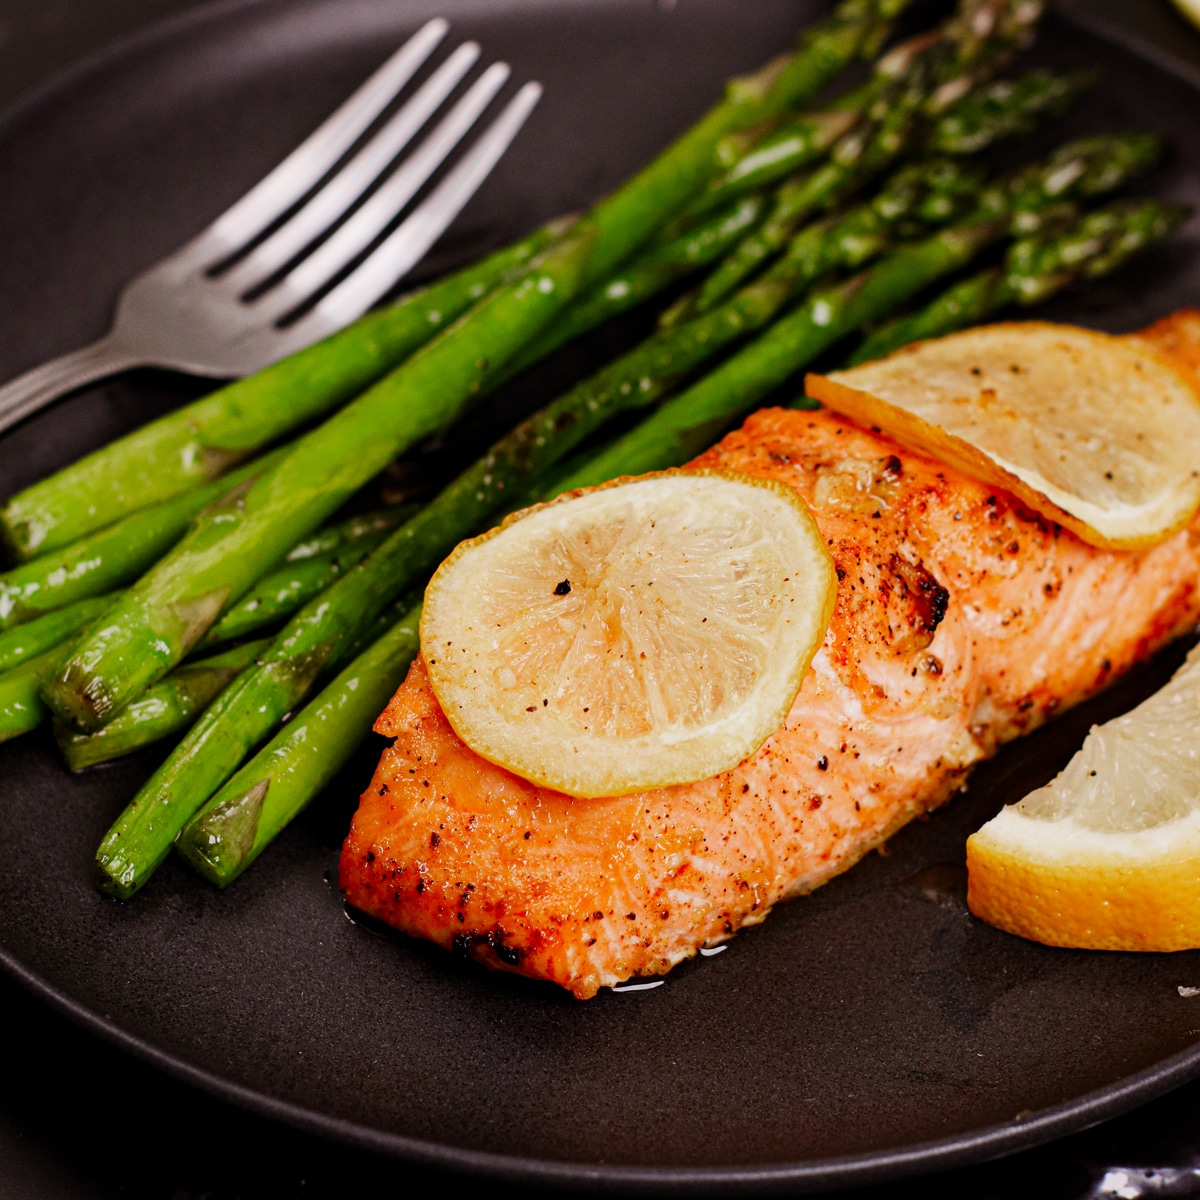 Air fried lemon salmon served with lemon slices and roasted asparagus